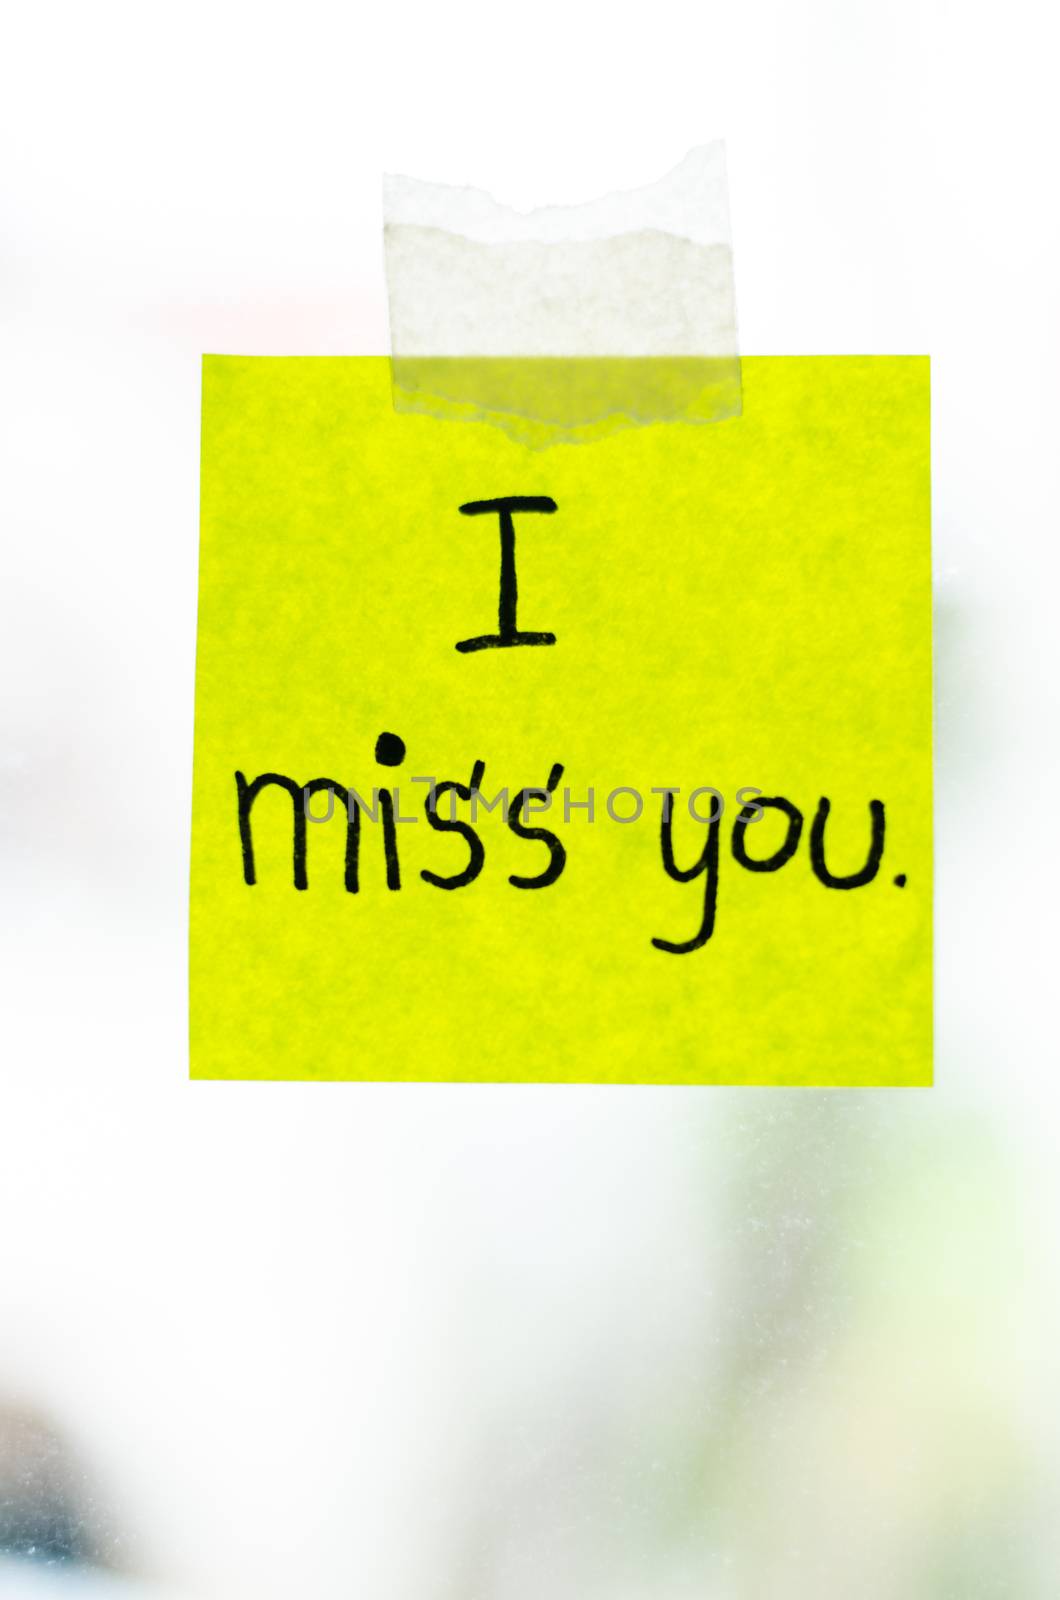 I miss you word on sticky note by ammza12